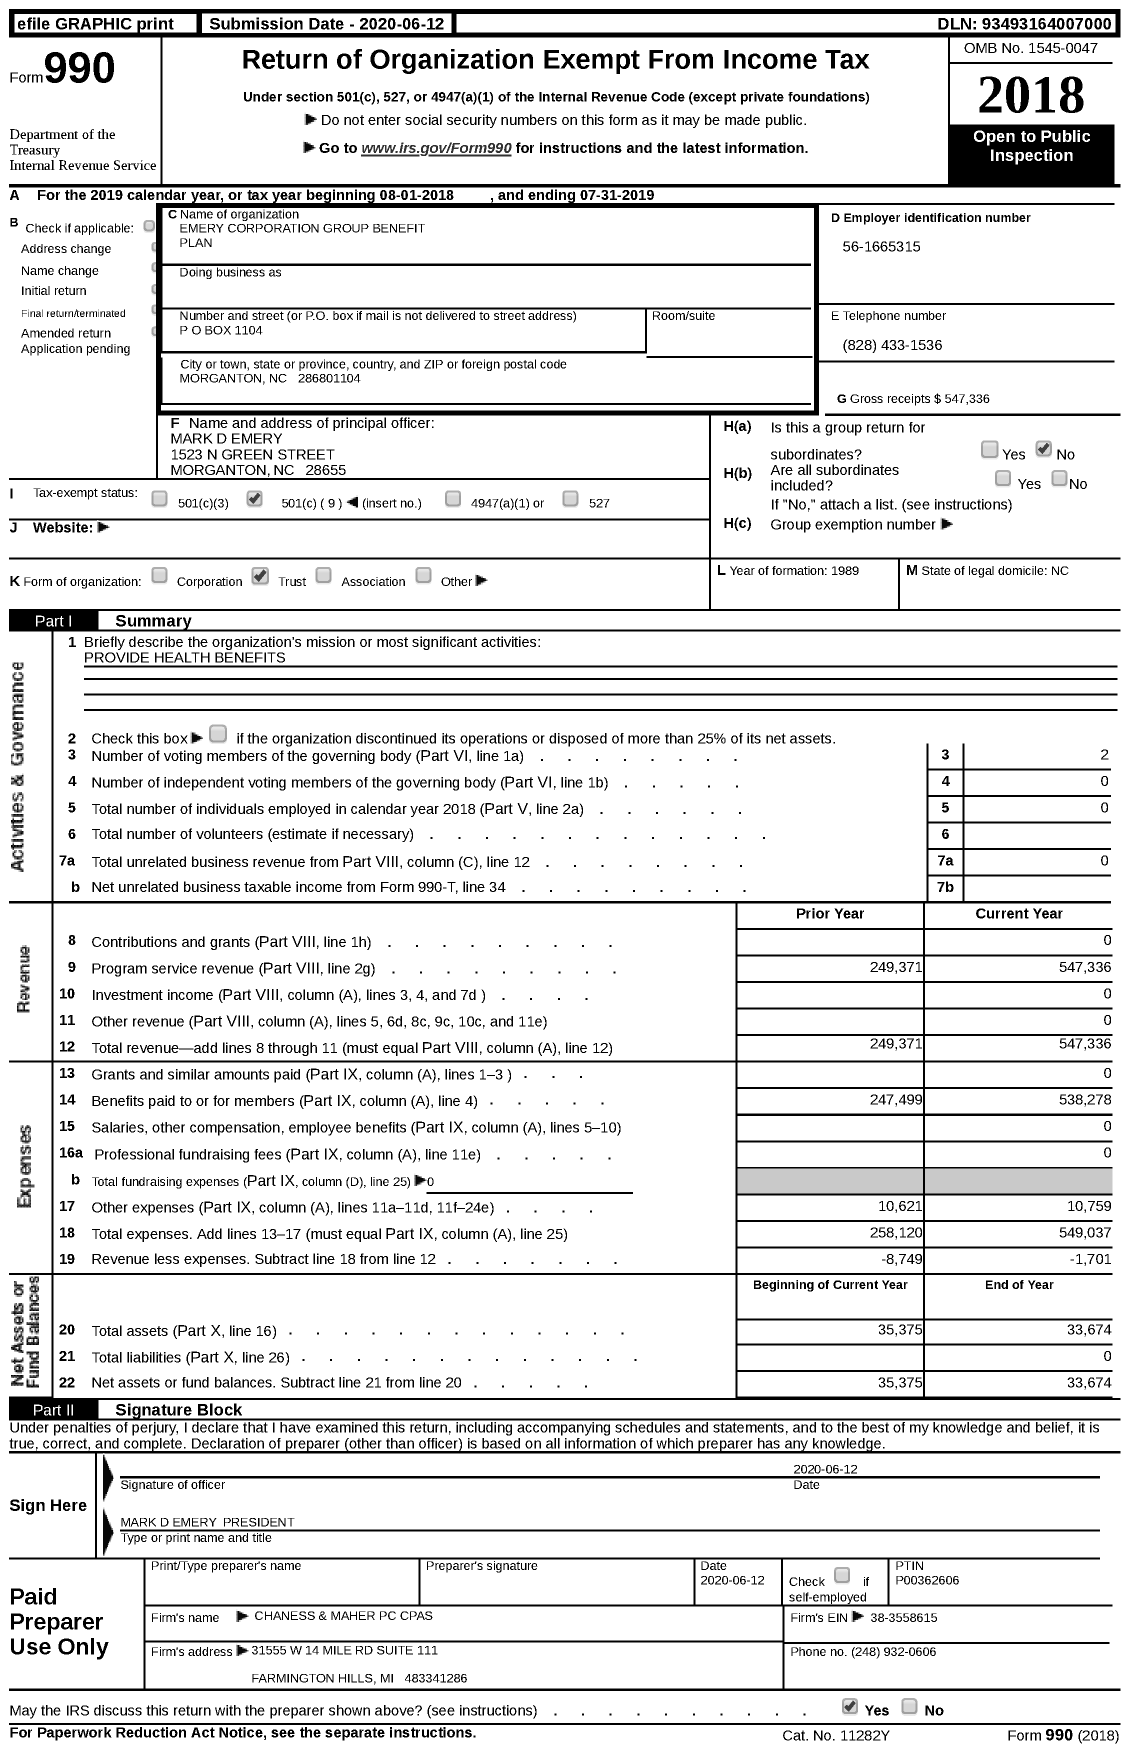 Image of first page of 2018 Form 990 for Emery Corporation Group Benefit Plan